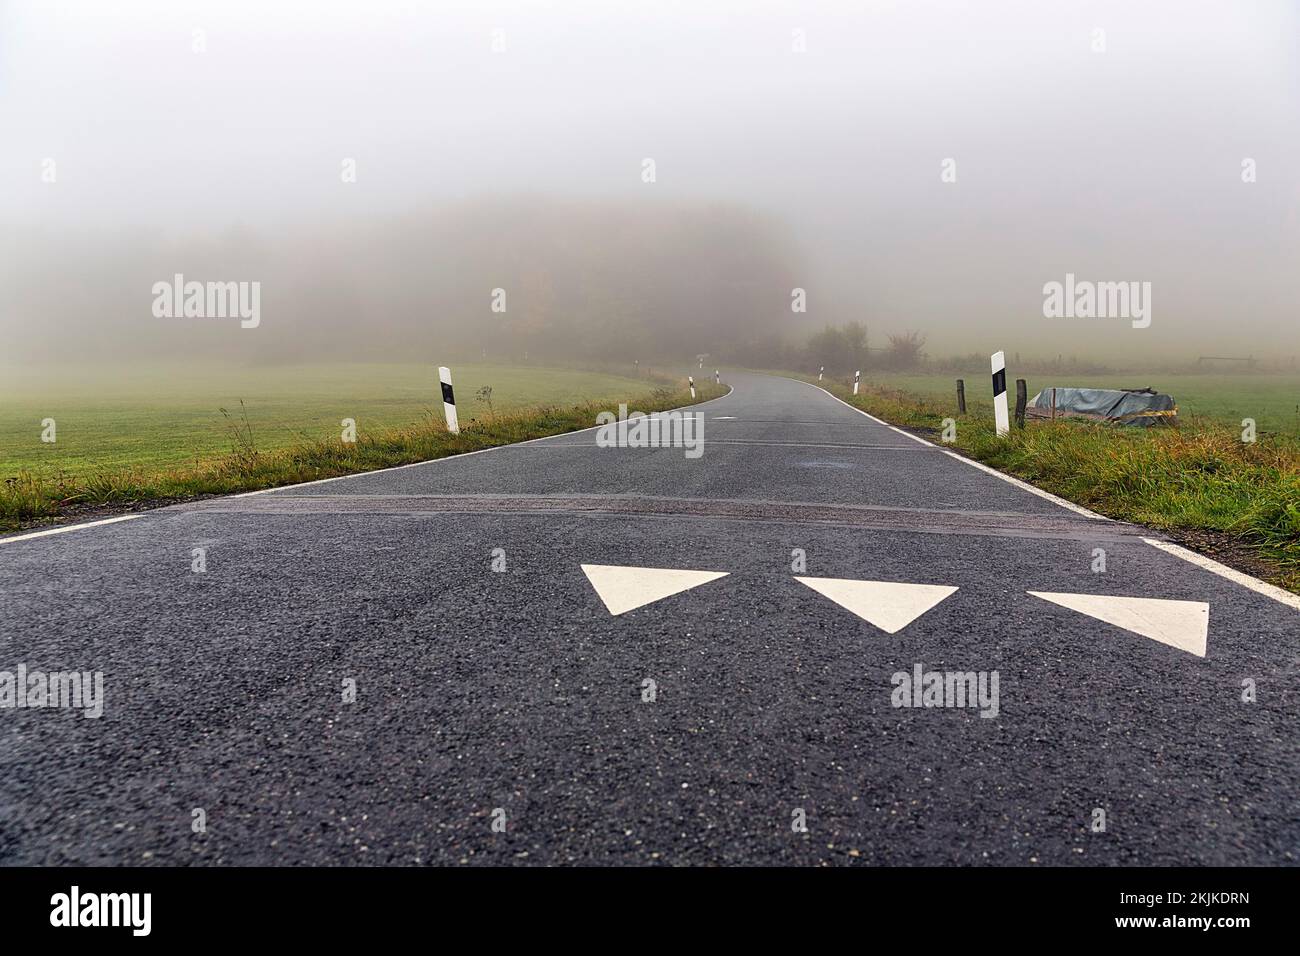 White triangles on roadway, shark's teeth, speed limit markings, winding road to Köterberg, dreary autumn weather with fog, Lügde, Weserbergland, Nort Stock Photo